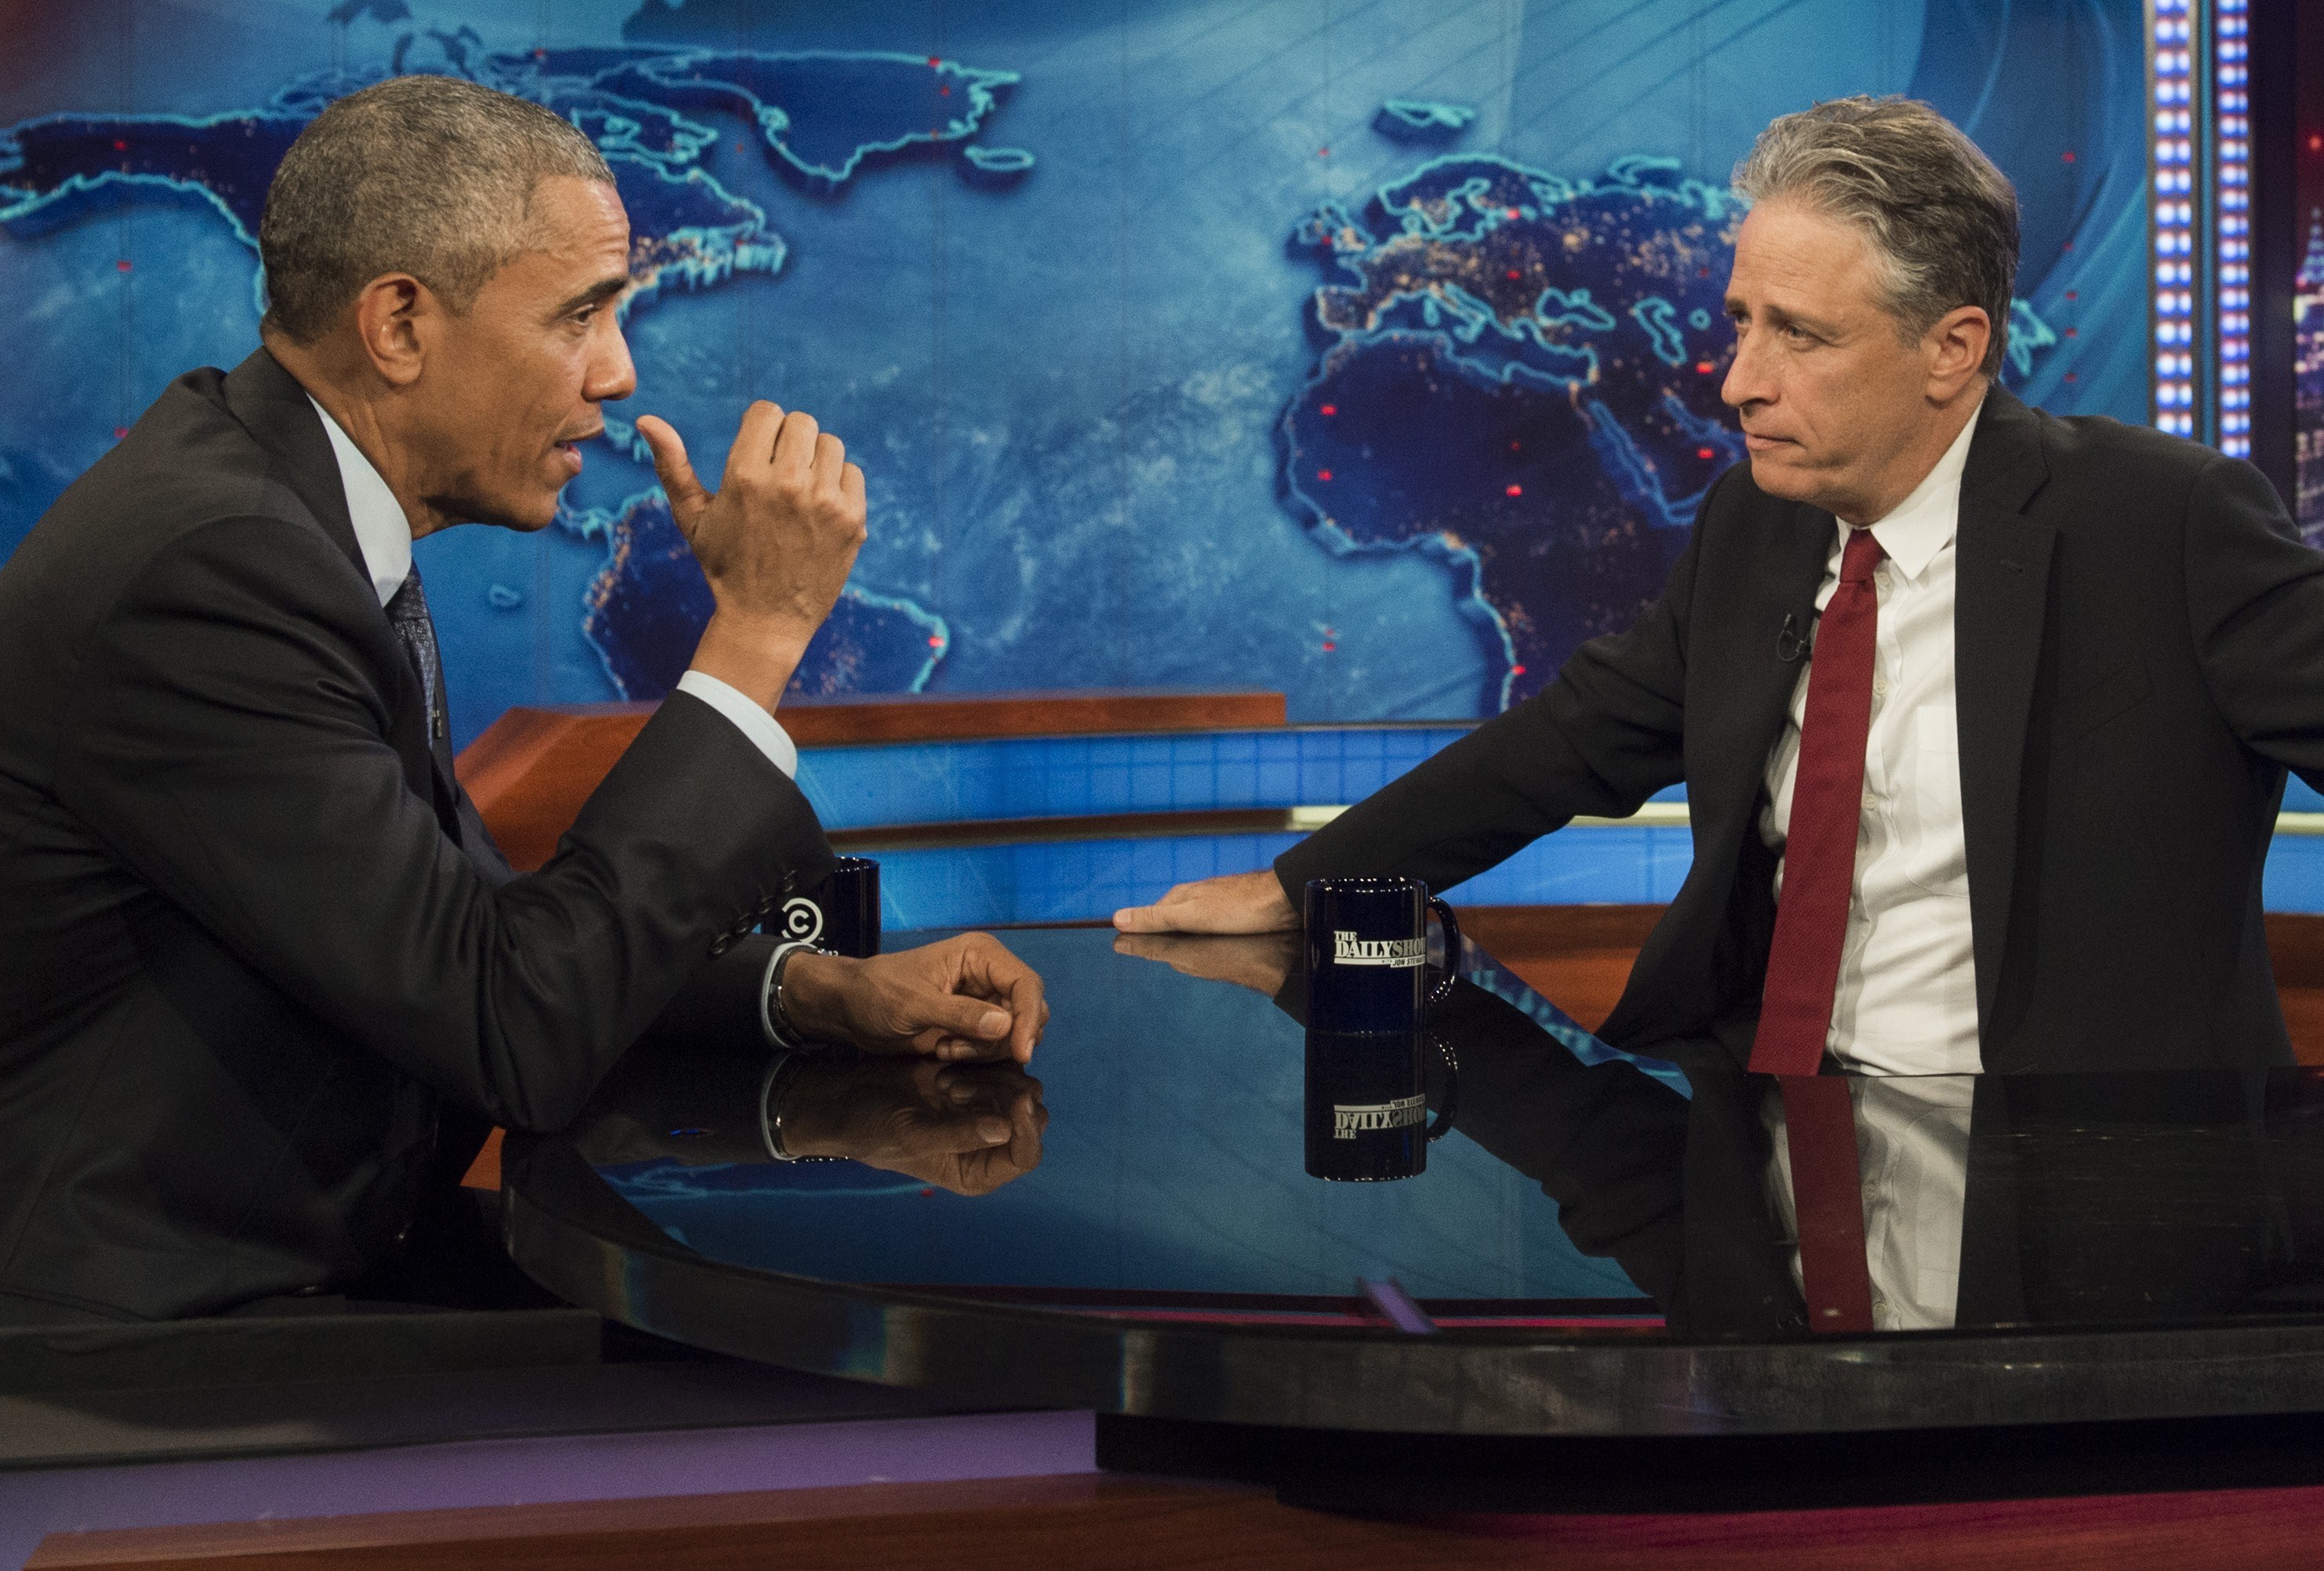 Jon Stewart gets ready to sign off "The Daily Show" CBS News